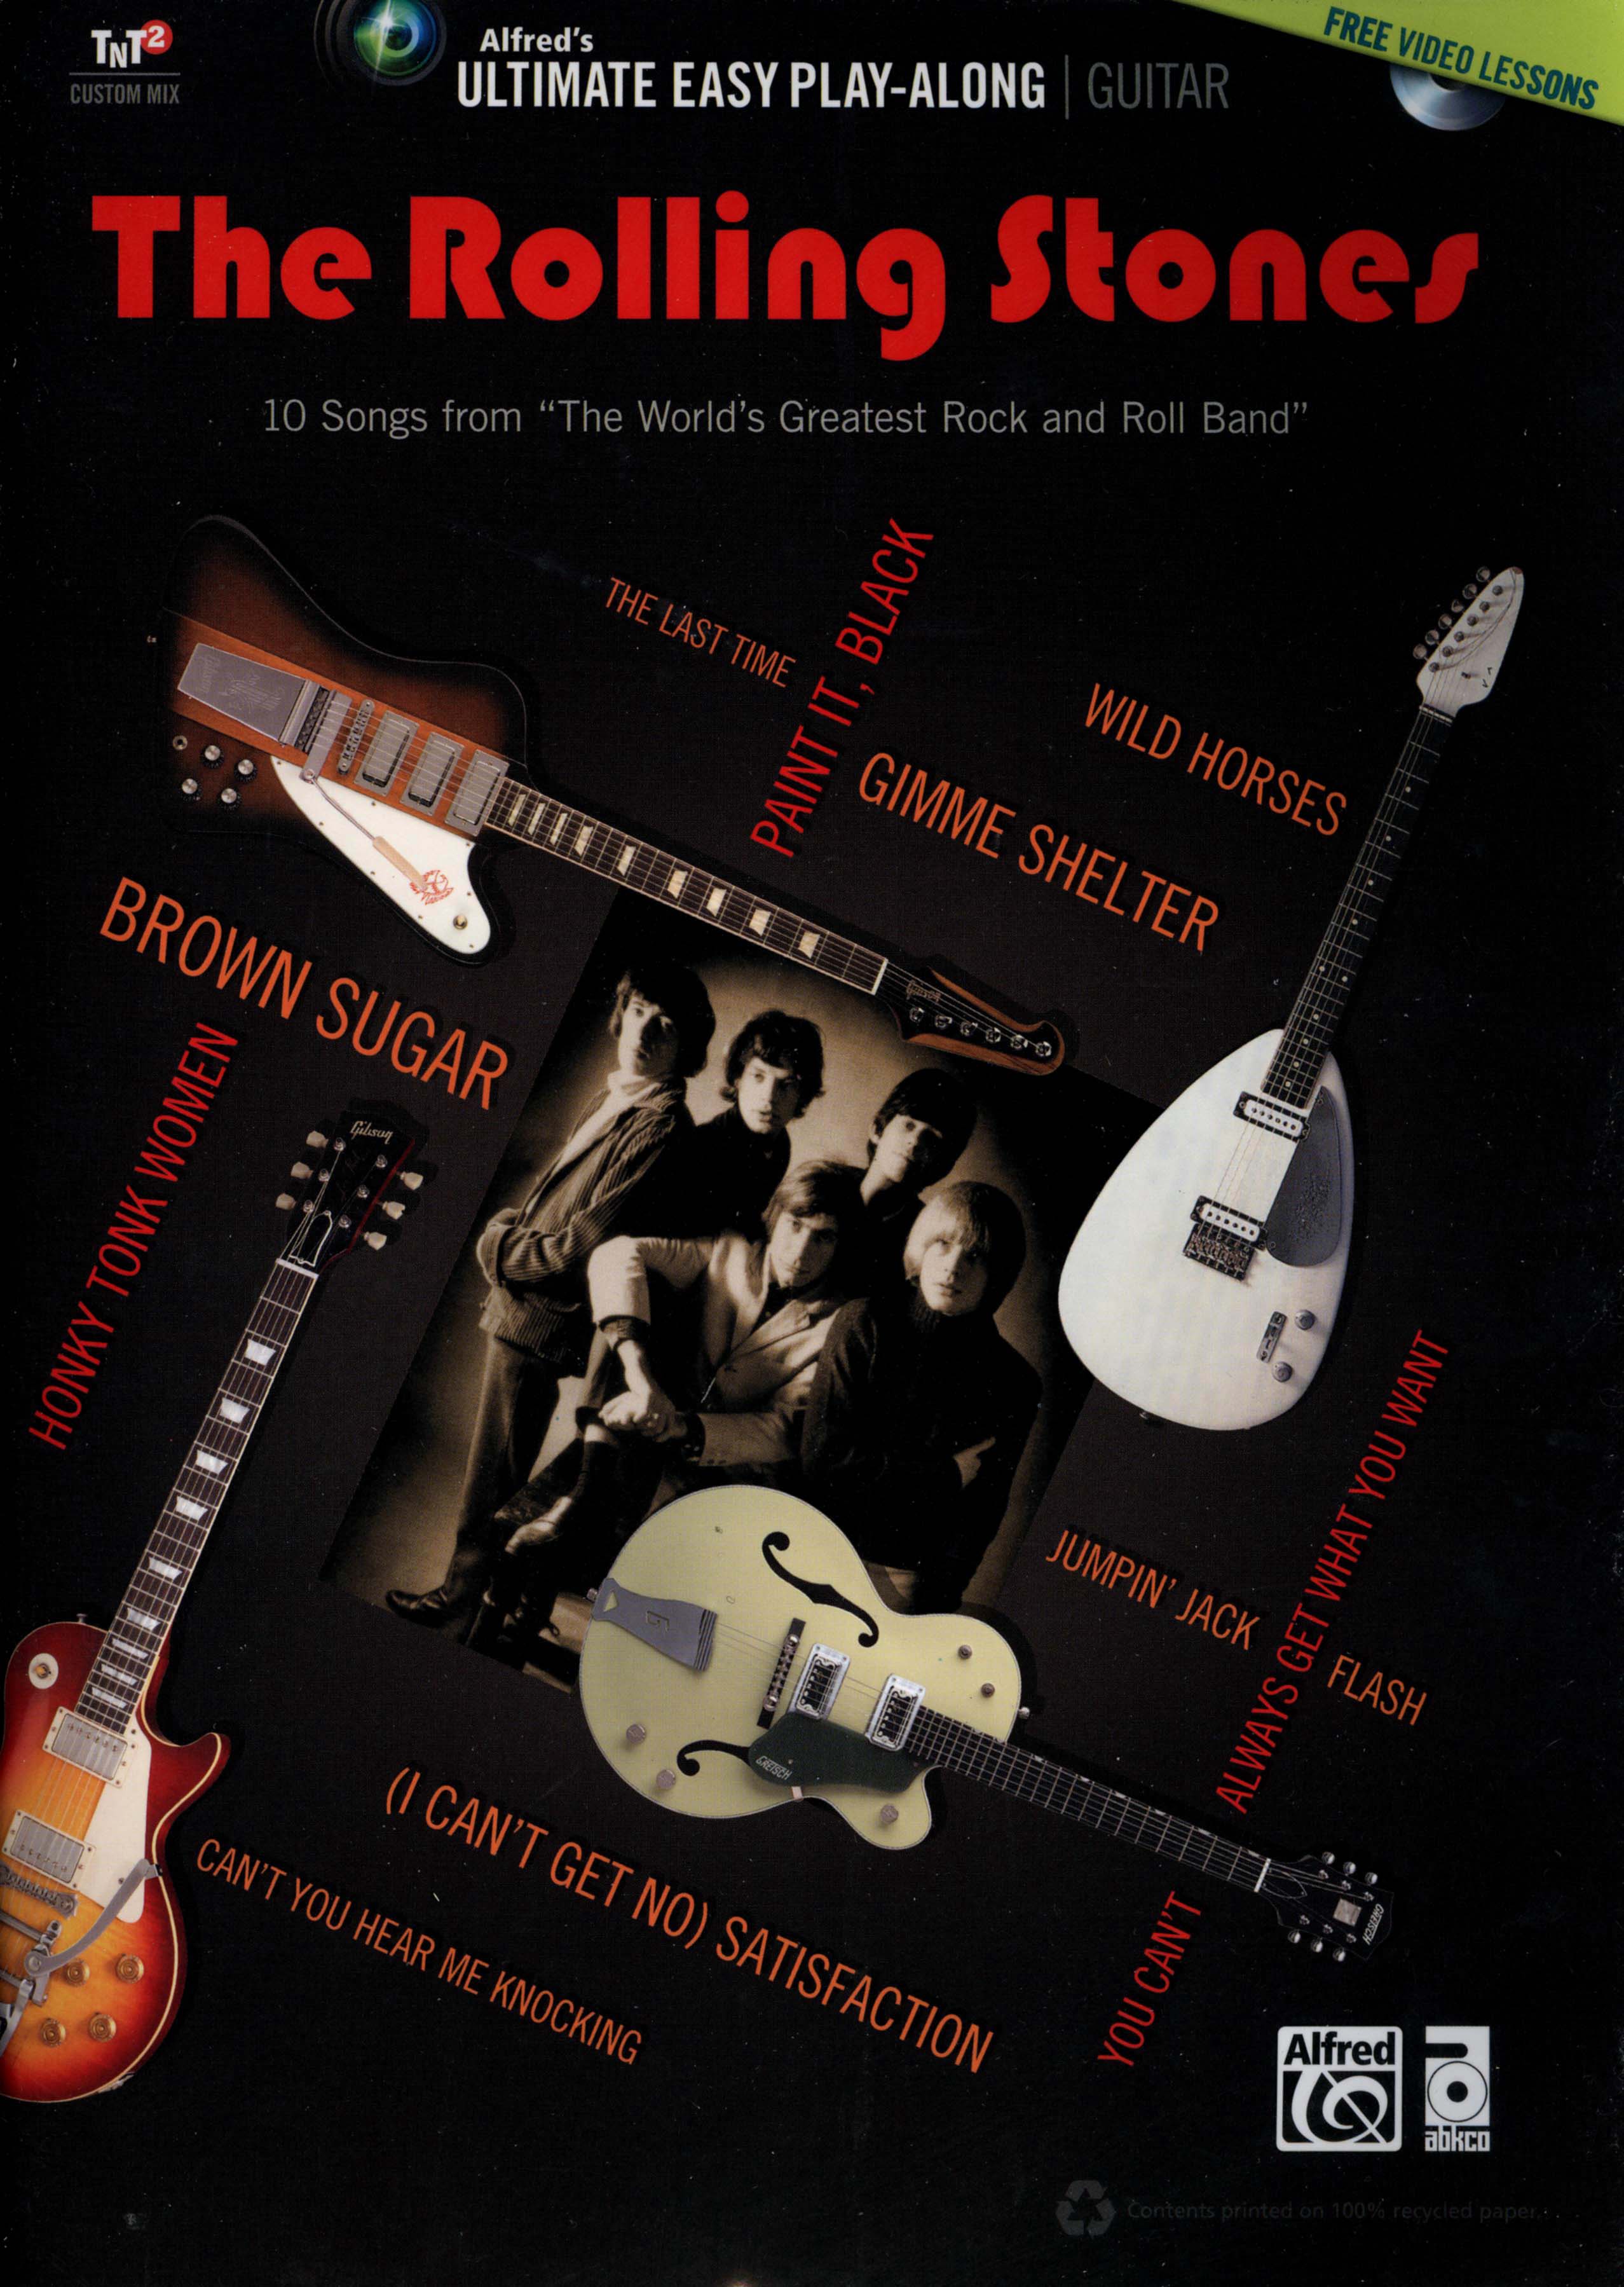 Alfred's Ultimate Easy Play-Along Guitar: The Rolling Stones [DVD] [2013]